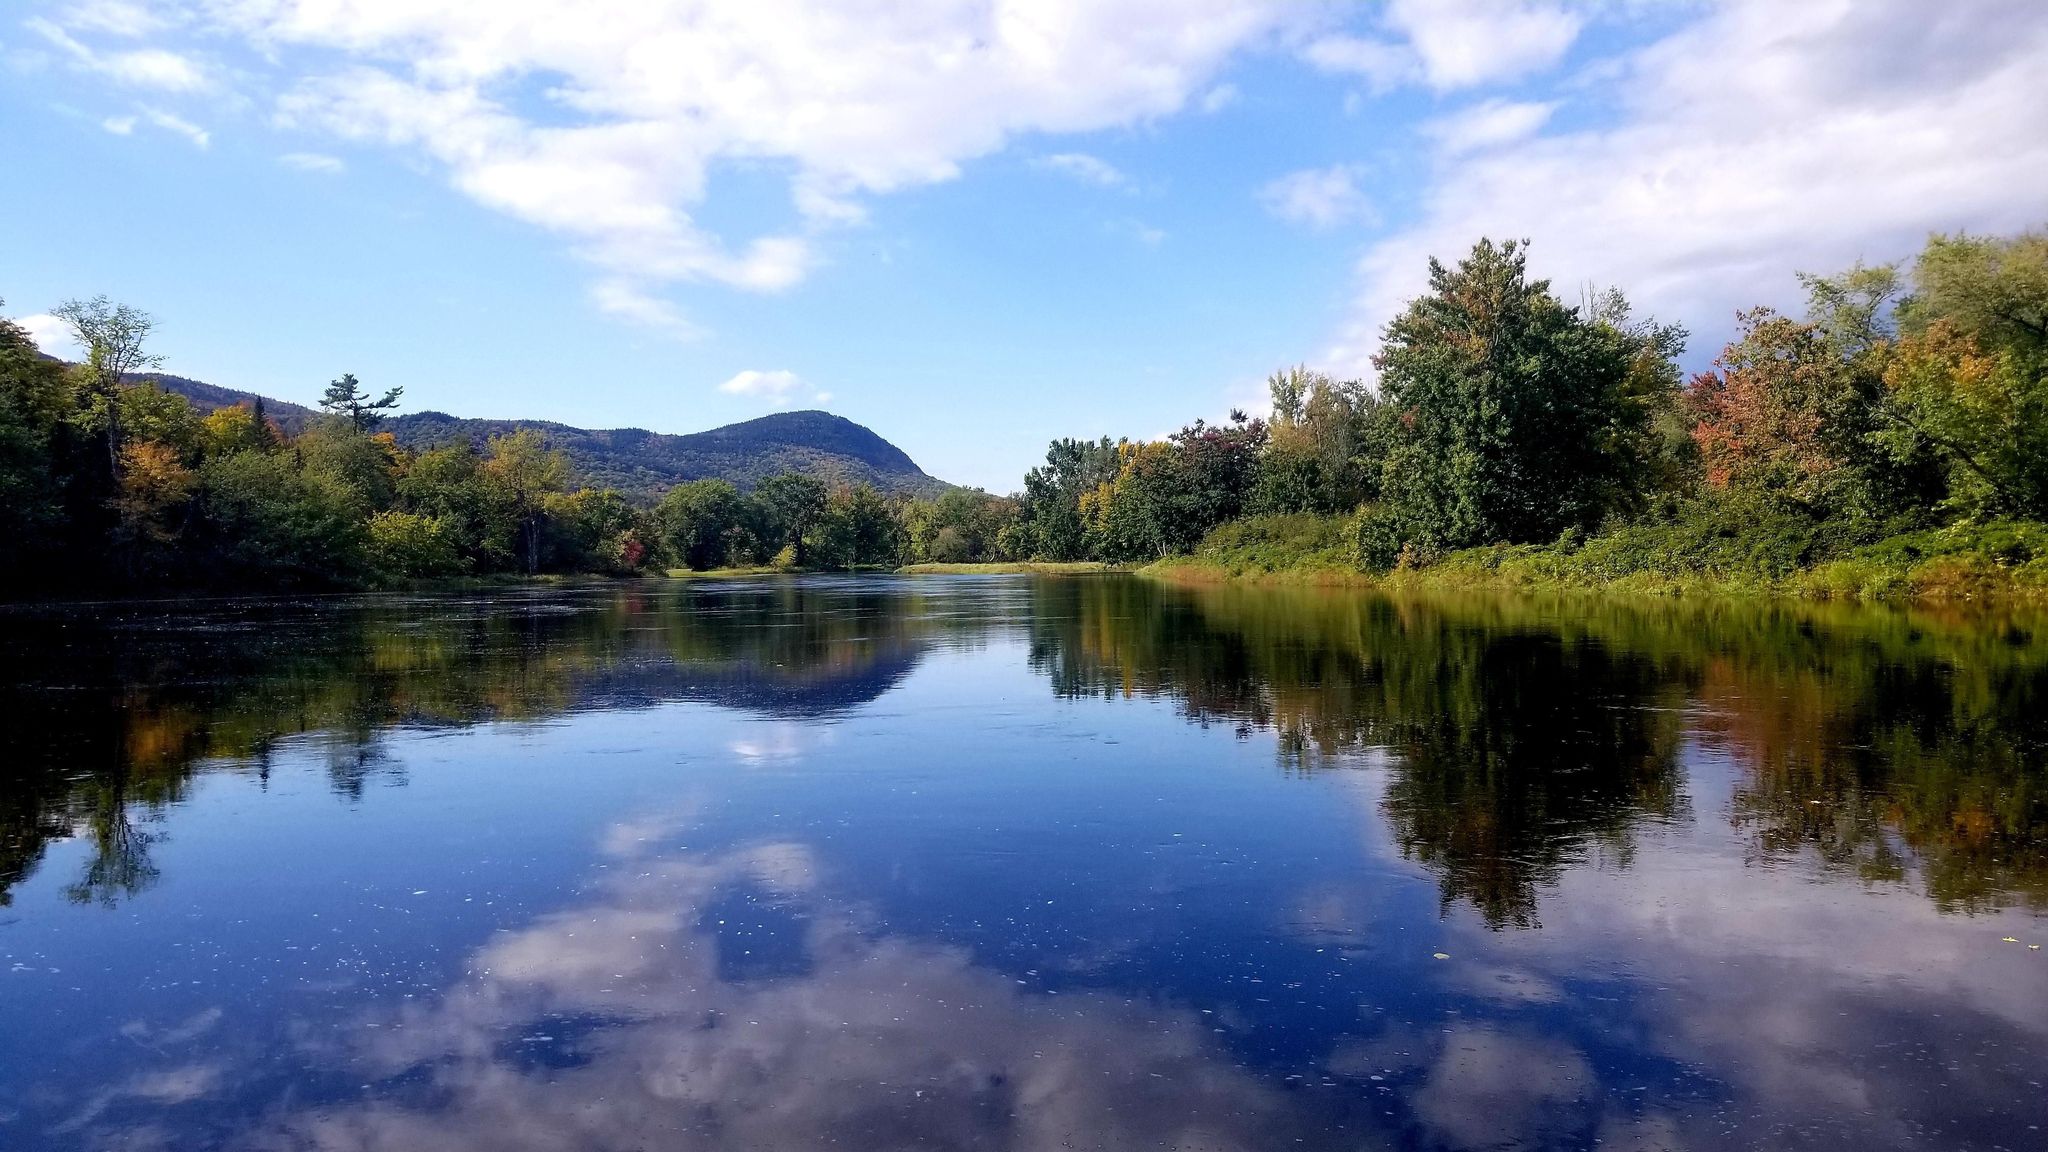 The East Branch of the Penobscot River is filled with wildness and beautiful scenery for the adventurous few who travel down it.